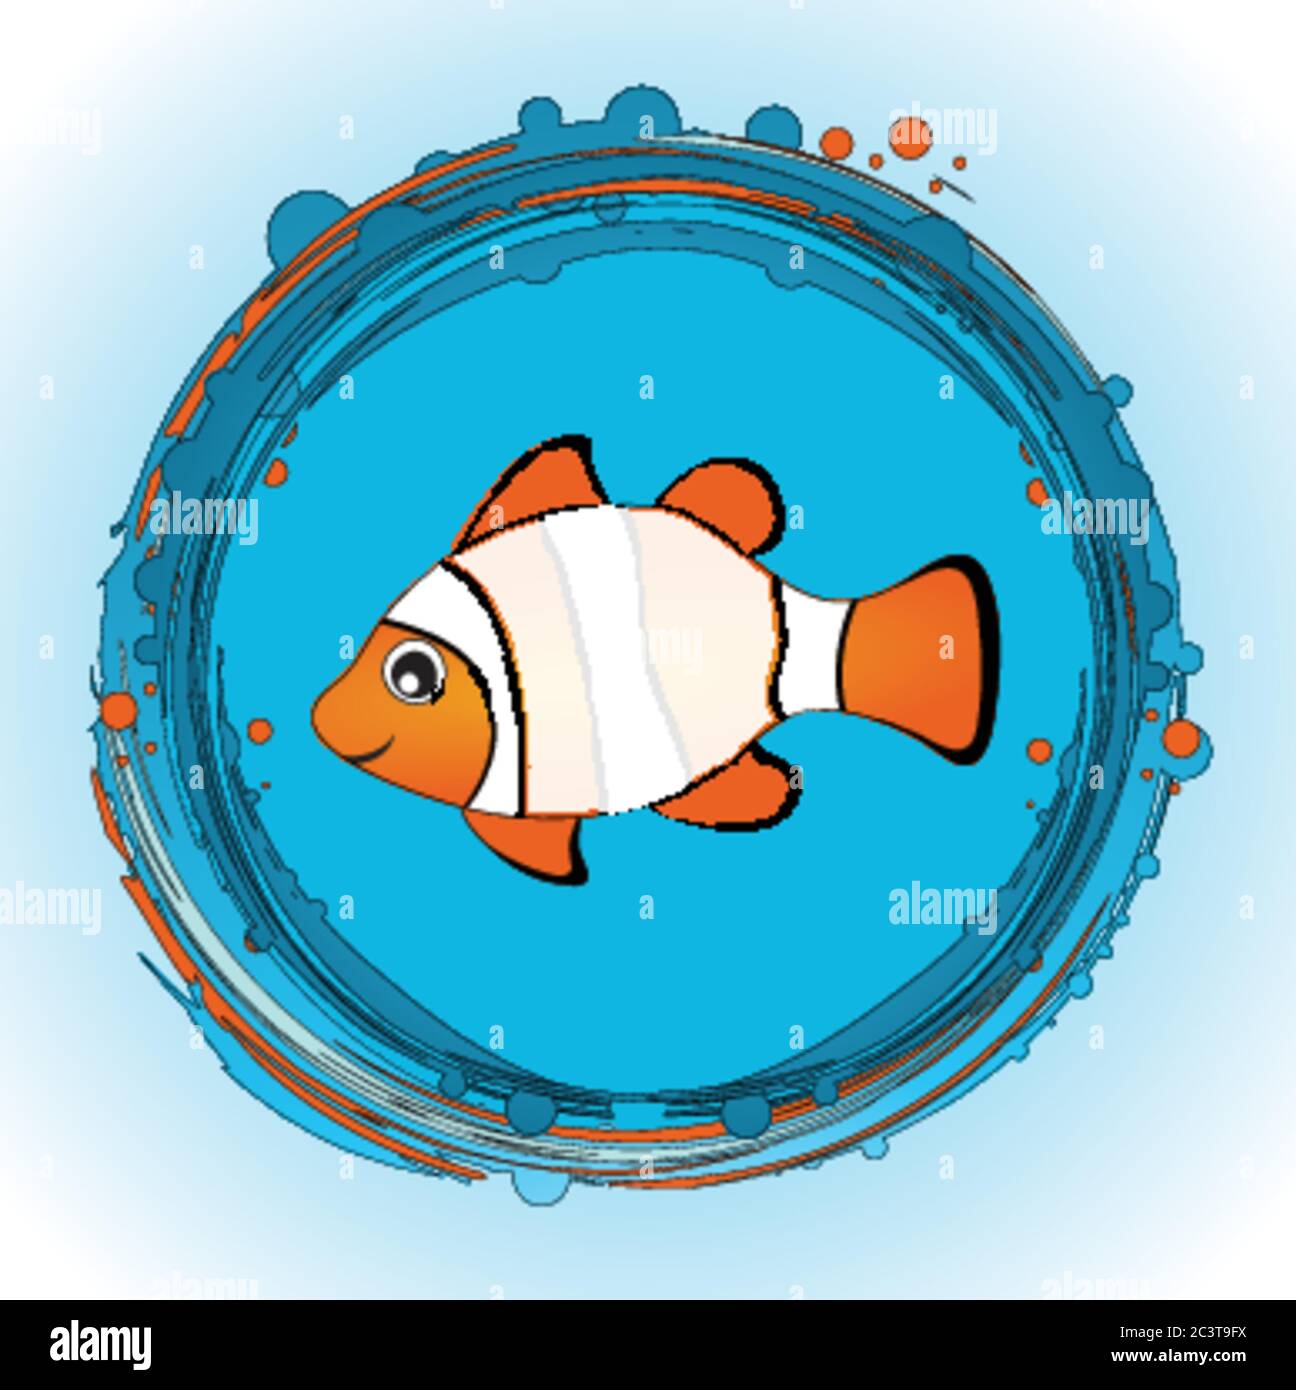 Hand Drawn Cute Tropical Nemo Fish With Blank Copy Space On His Body Over Circular Blue And Orange Border And White And Blue Background Stock Vector